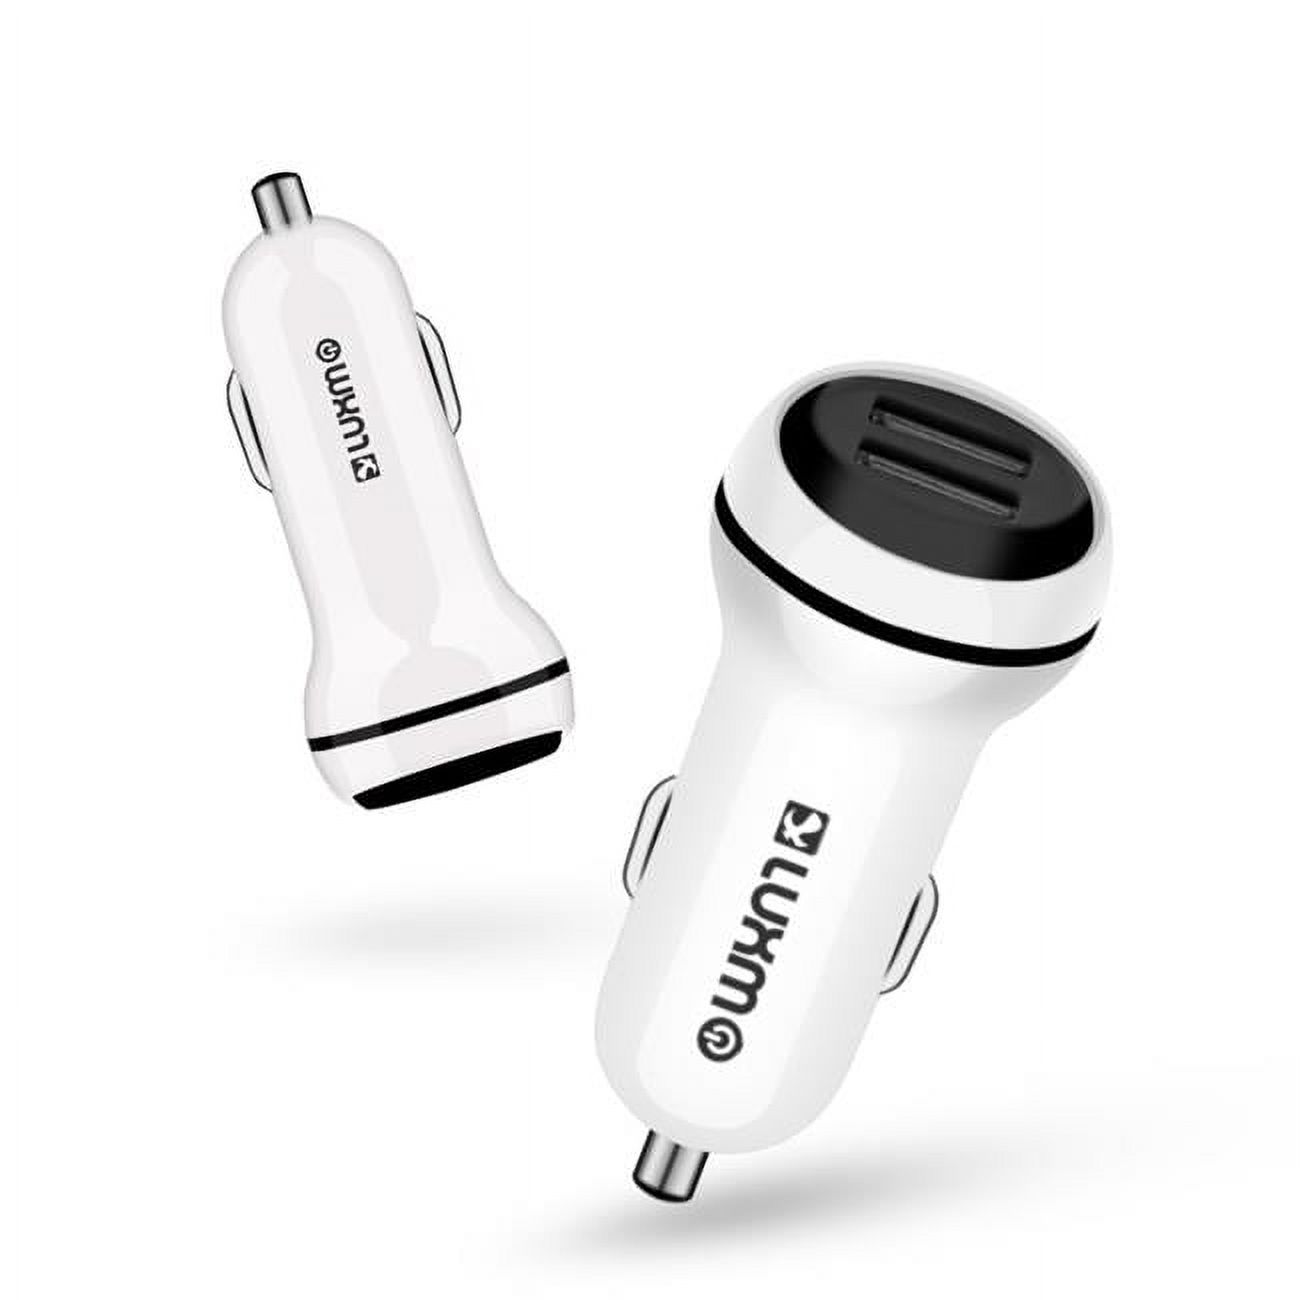 Luxmo 1 Universal Dual Usb 2.1a Car Charger With Smart Charge Ic Led Indicator - White - image 1 of 3